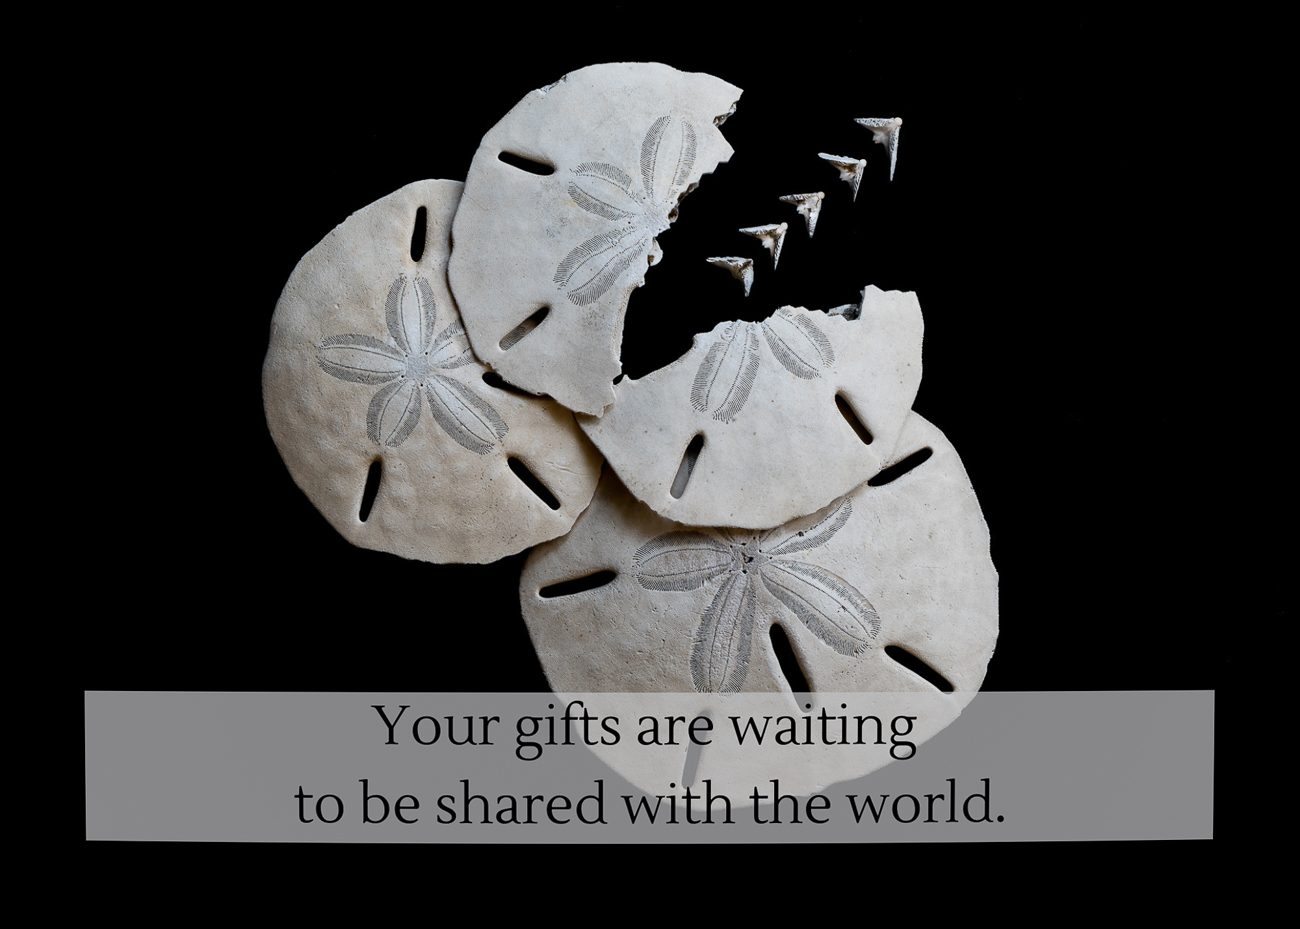 A photo of sand dollars and the doves released when broken as well as a quote about your inner gifts.